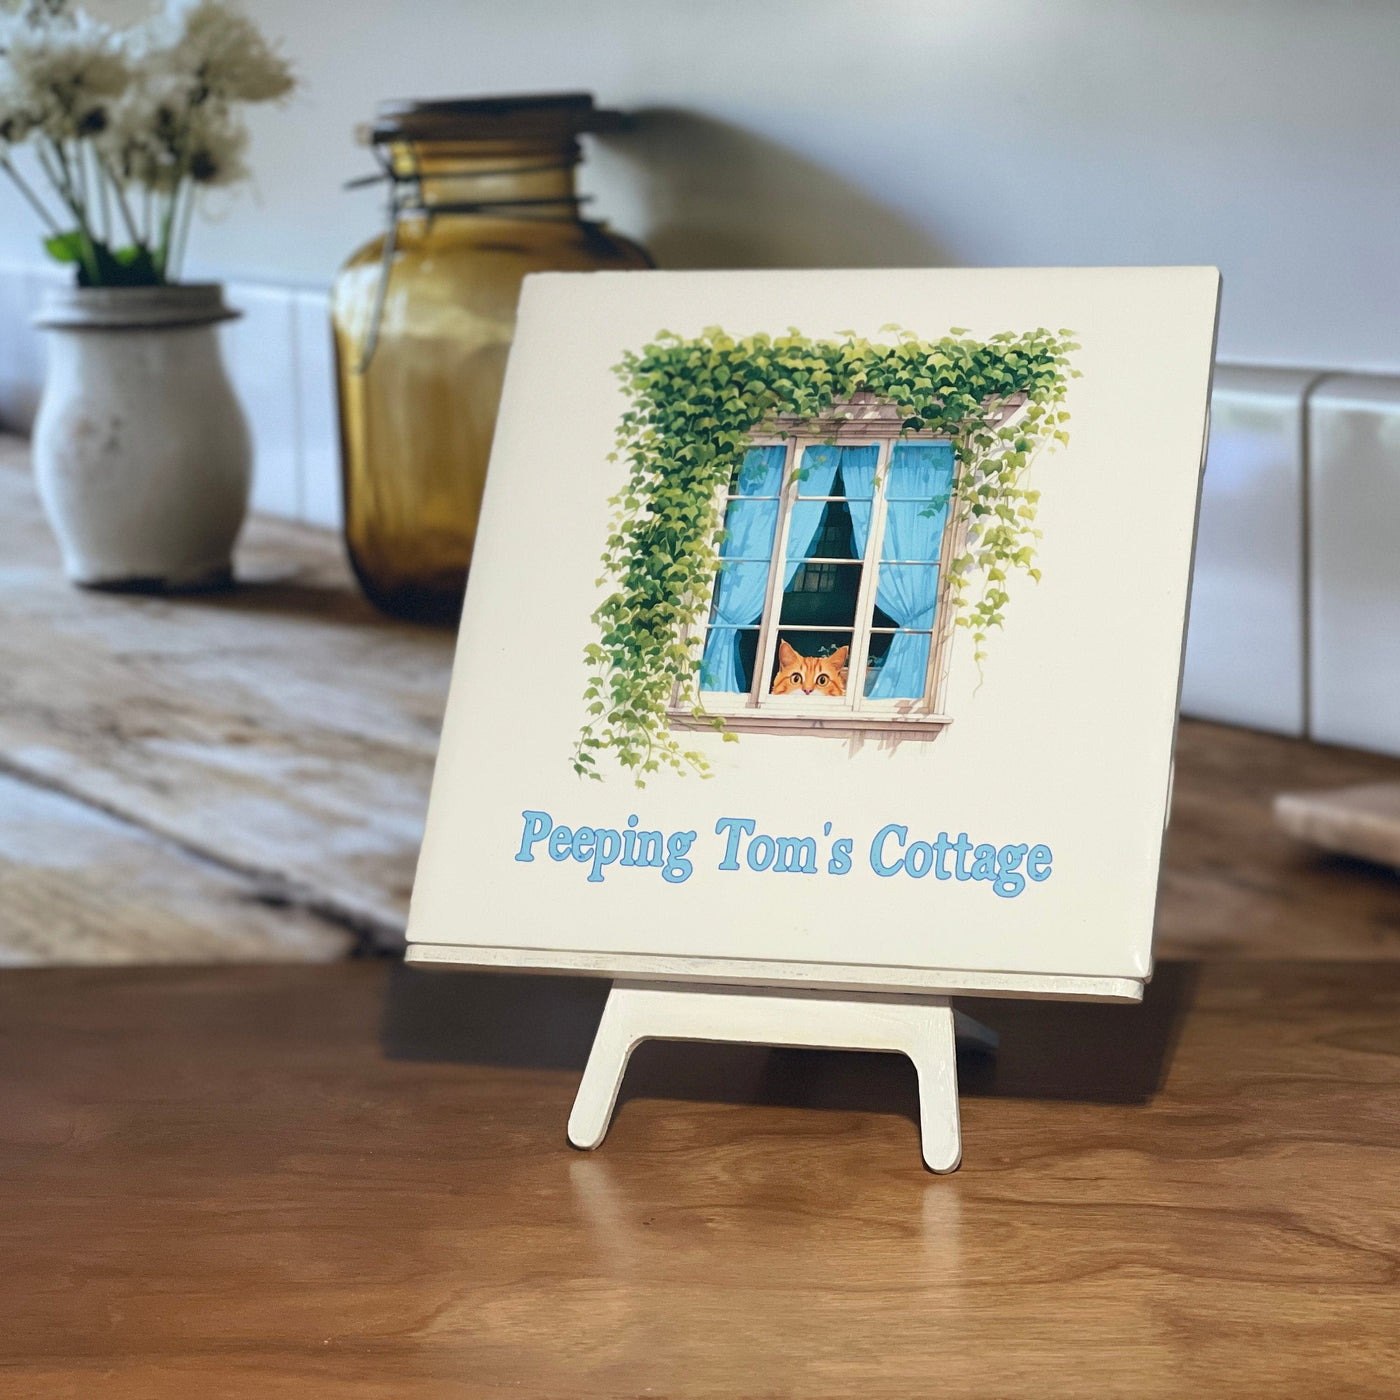 Peeping Tom's Cottage Custom Printed Tile Serene Lakeside Retreat: Hand-Painted Art Tile of Woman Reading with Dog for Peaceful Home Decor